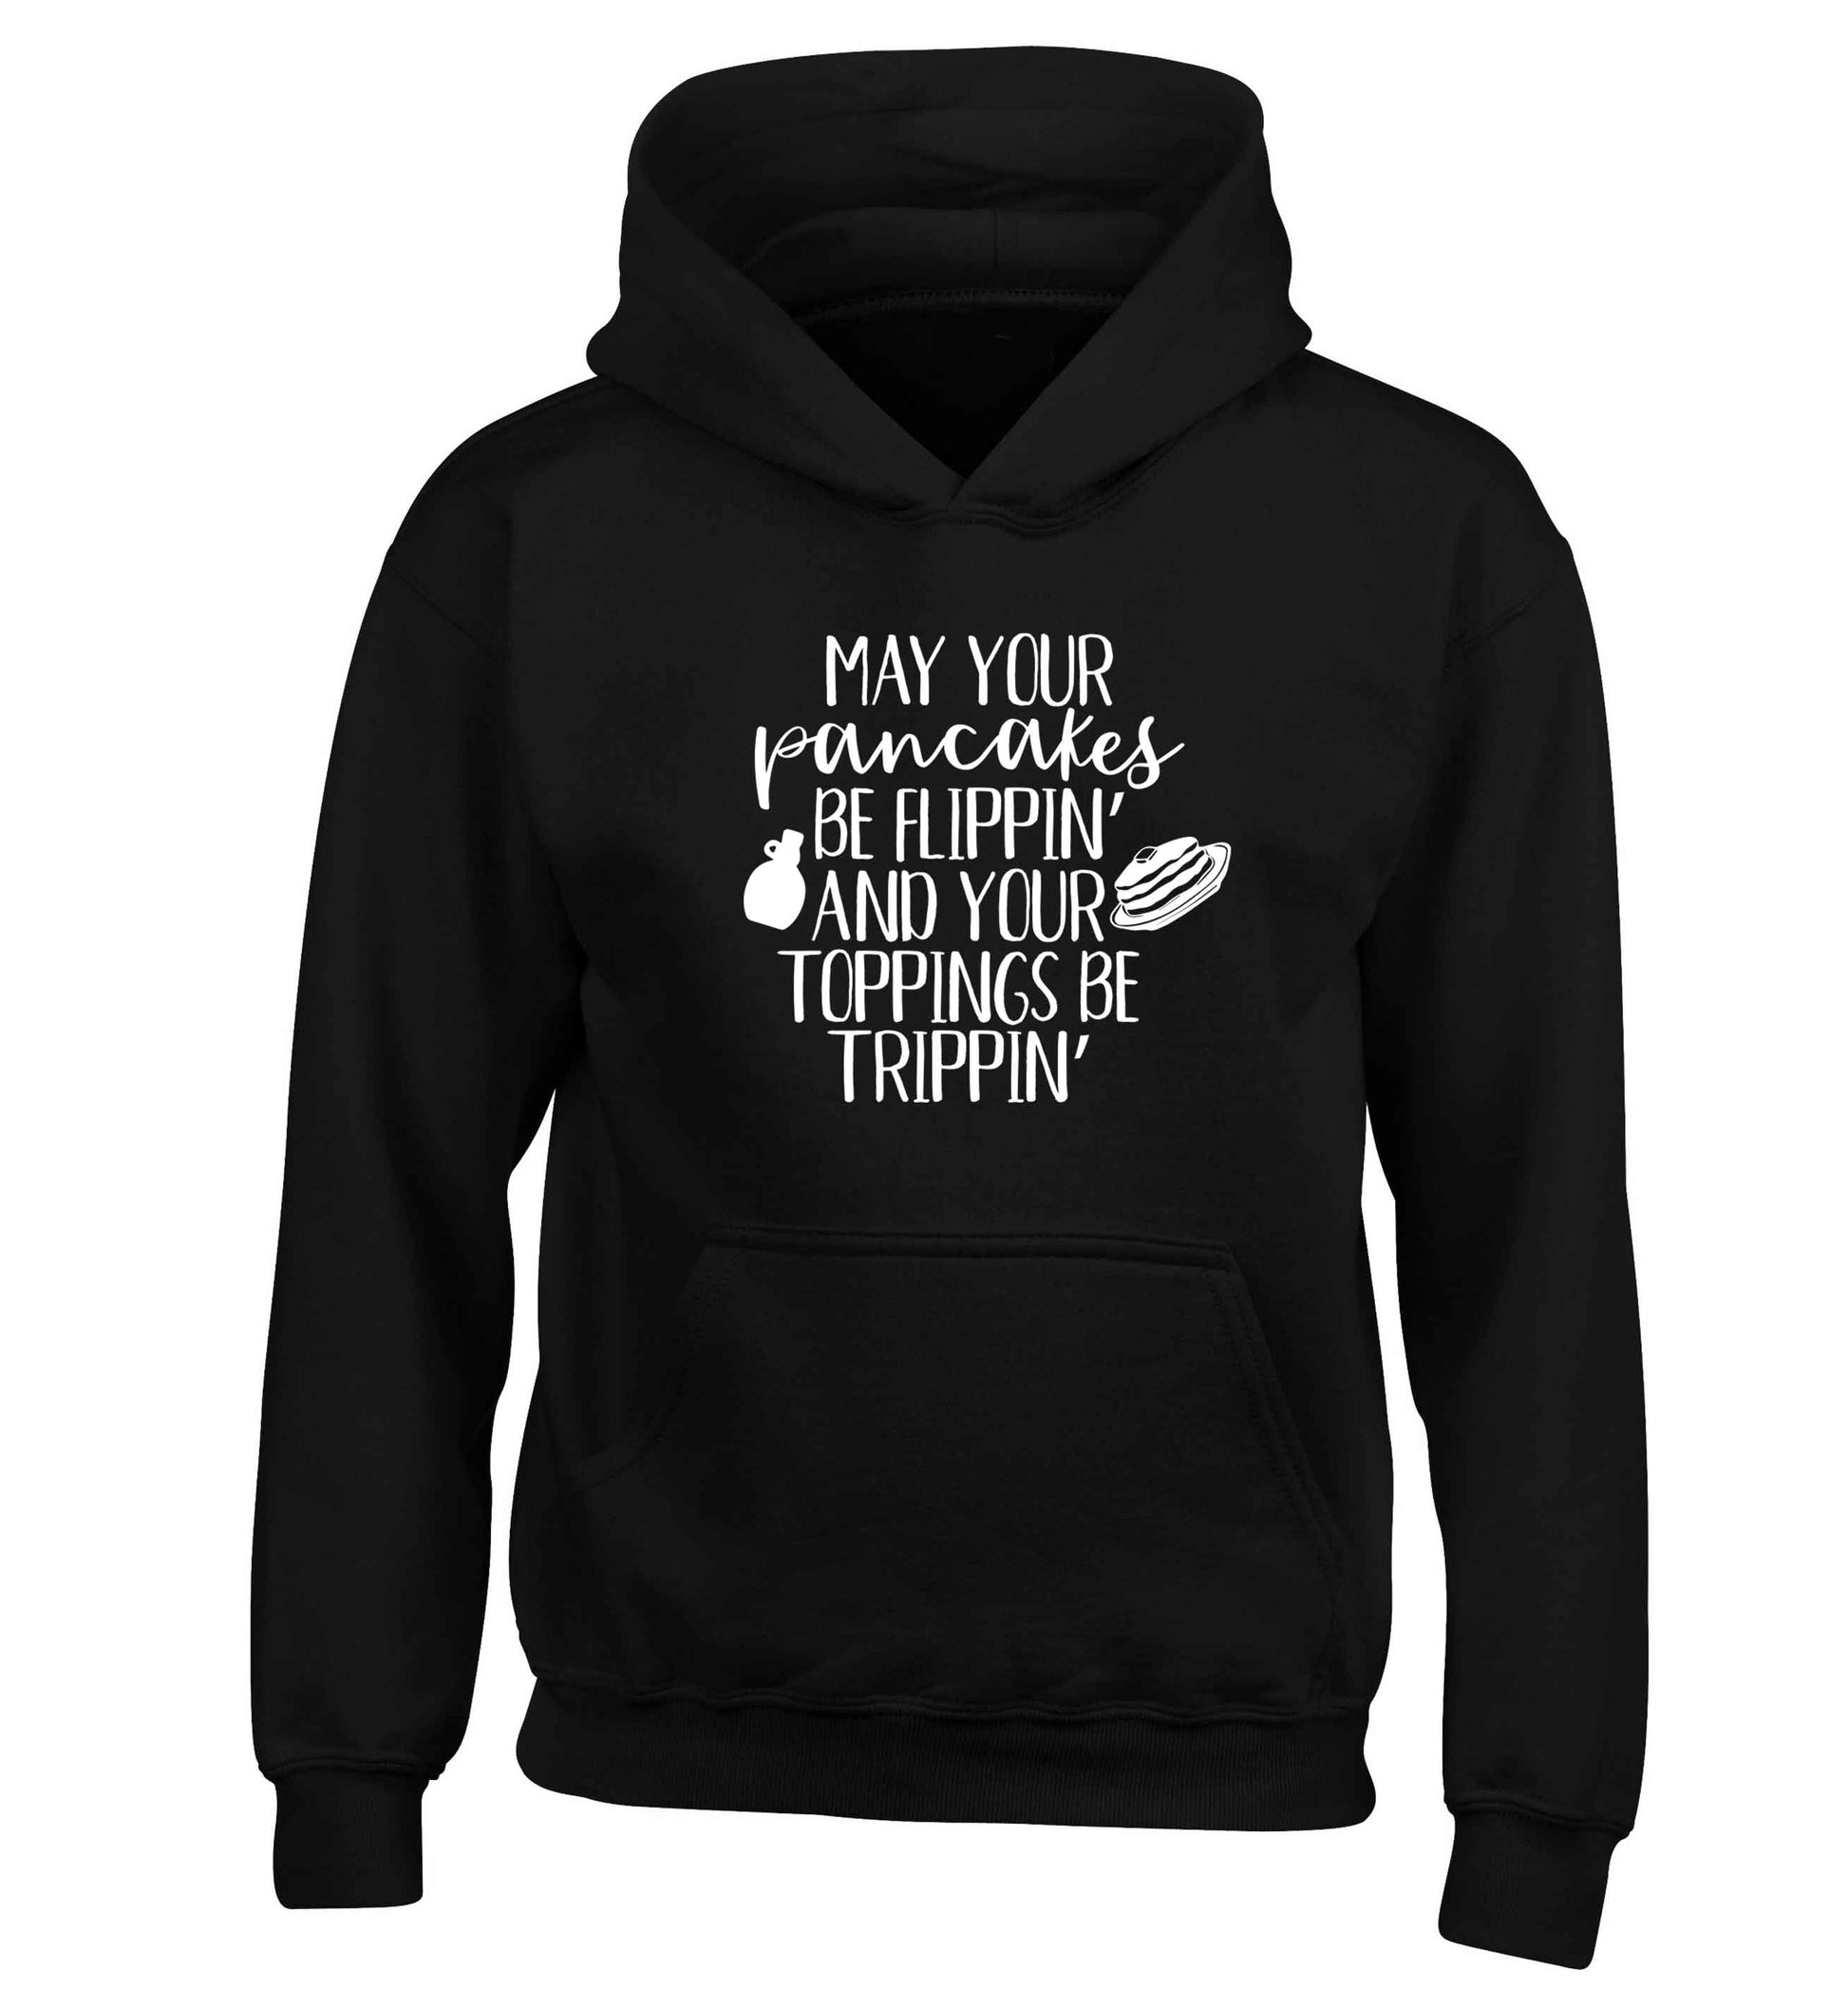 May your pancakes be flippin' and your toppings be trippin' children's black hoodie 12-13 Years